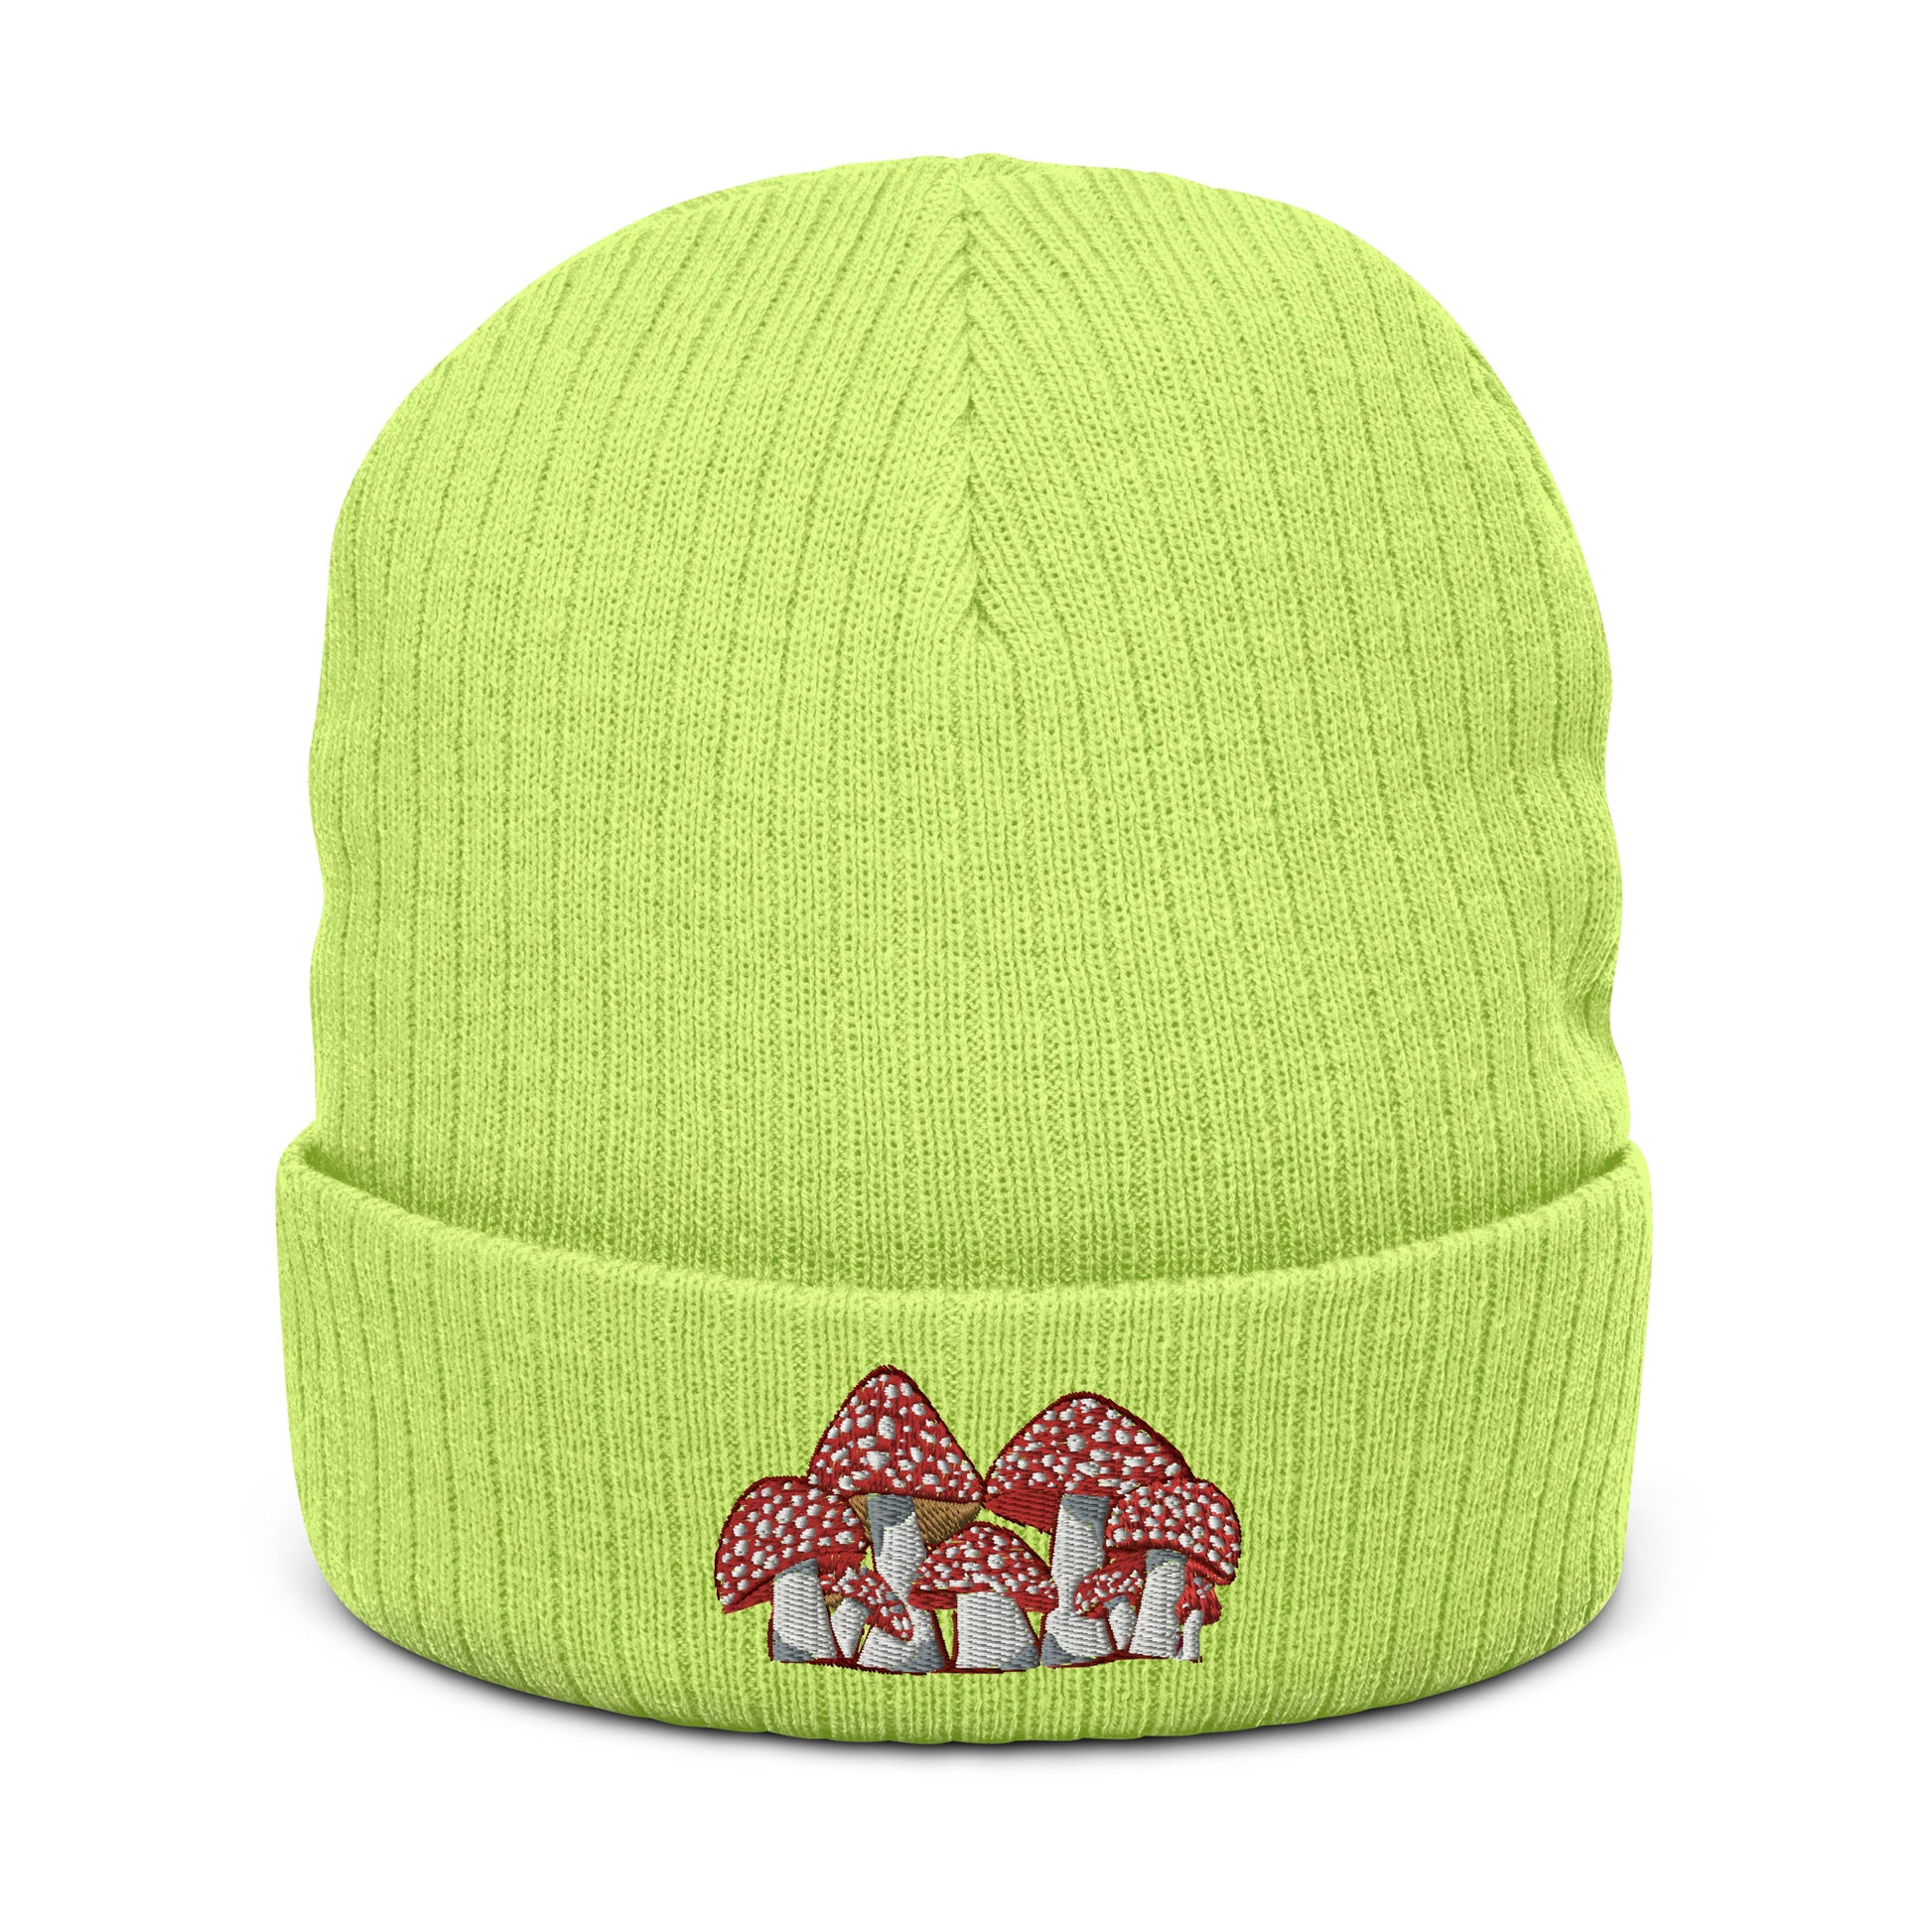 A neon green ribbed knit beanie has an embroidery of Fly Agaric mushrooms on the front.